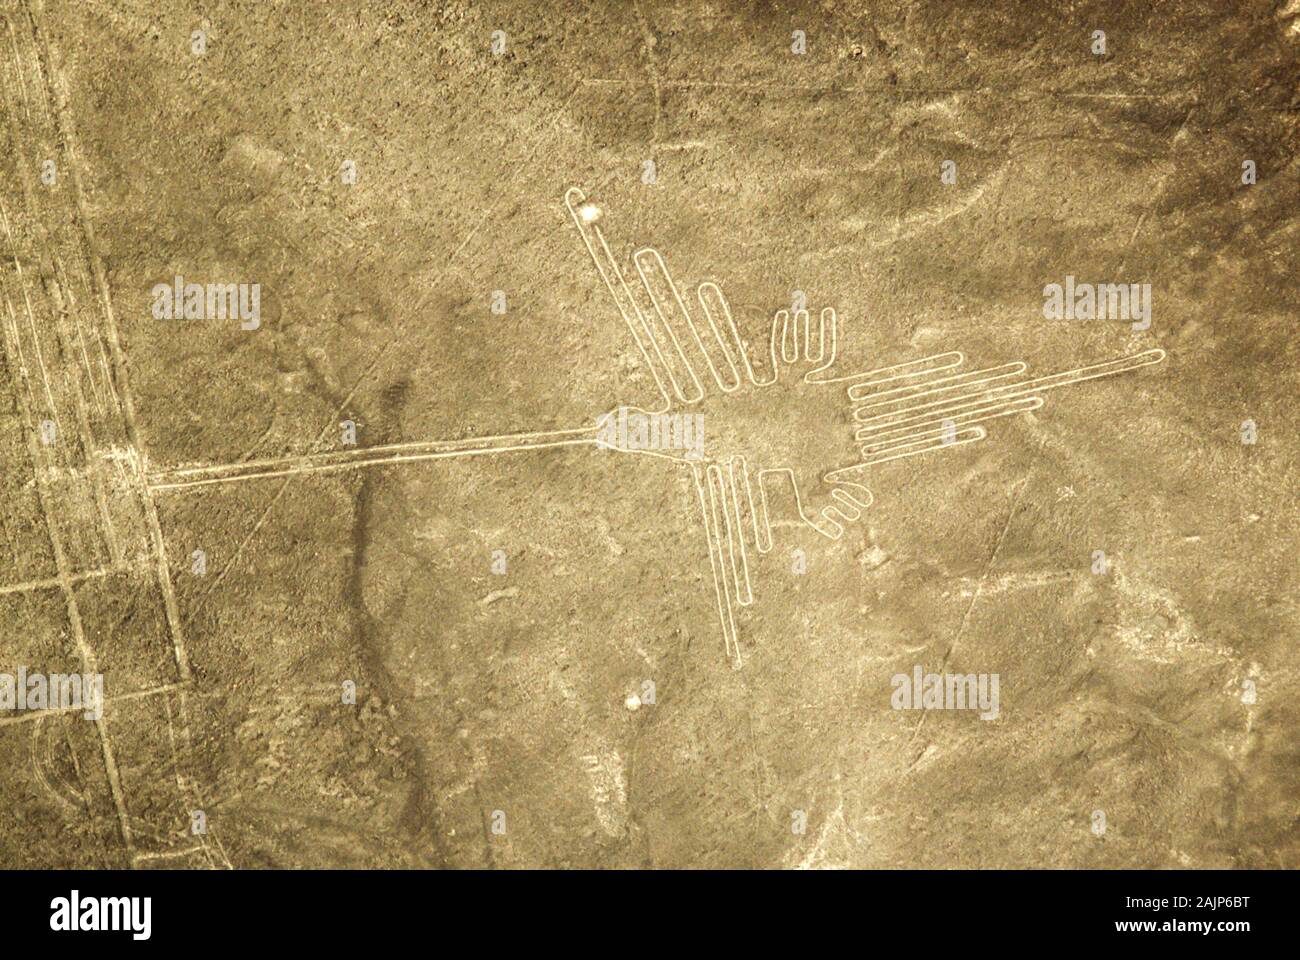 Aerial view of a hummingbird shape. The Nazca Lines are a group of very large geoglyphs formed by depressions or shallow incisions made in the soil of Stock Photo